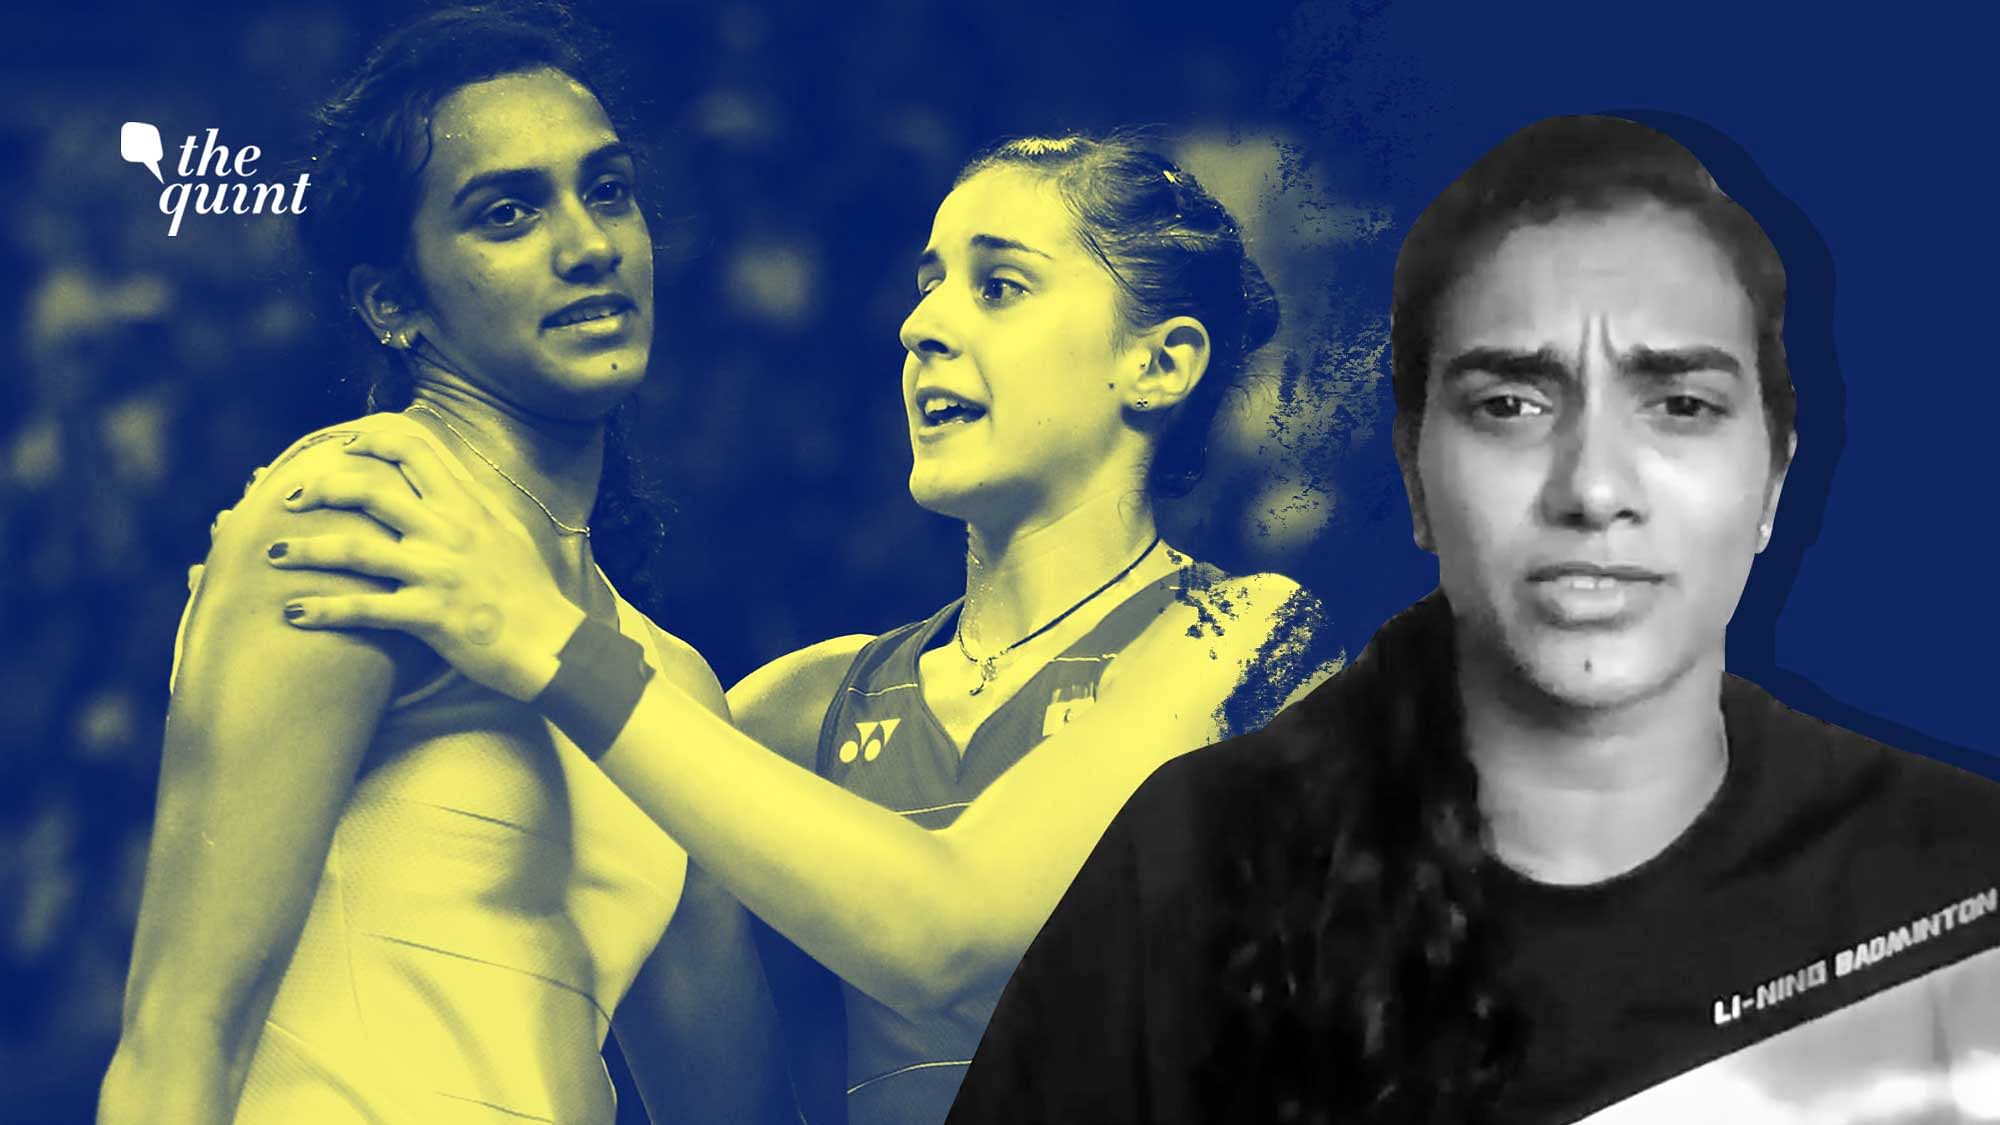 PV Sindhu comments on if Marin’s withdrawal from the Olympics will impact her medal chances